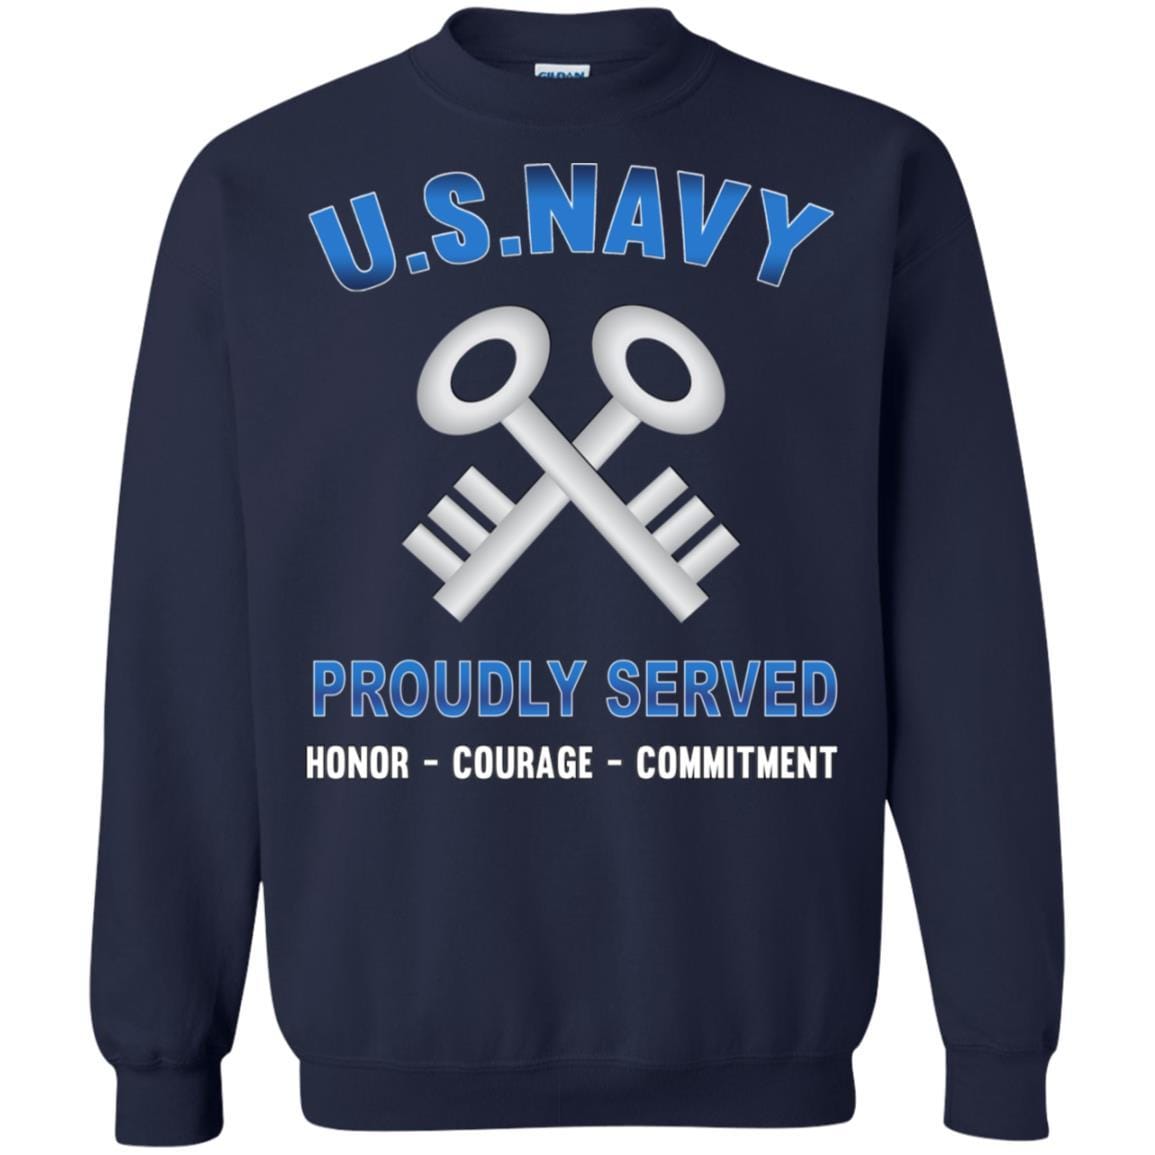 U.S Navy Logistics specialist Navy LS - Proudly Served T-Shirt For Men On Front-TShirt-Navy-Veterans Nation